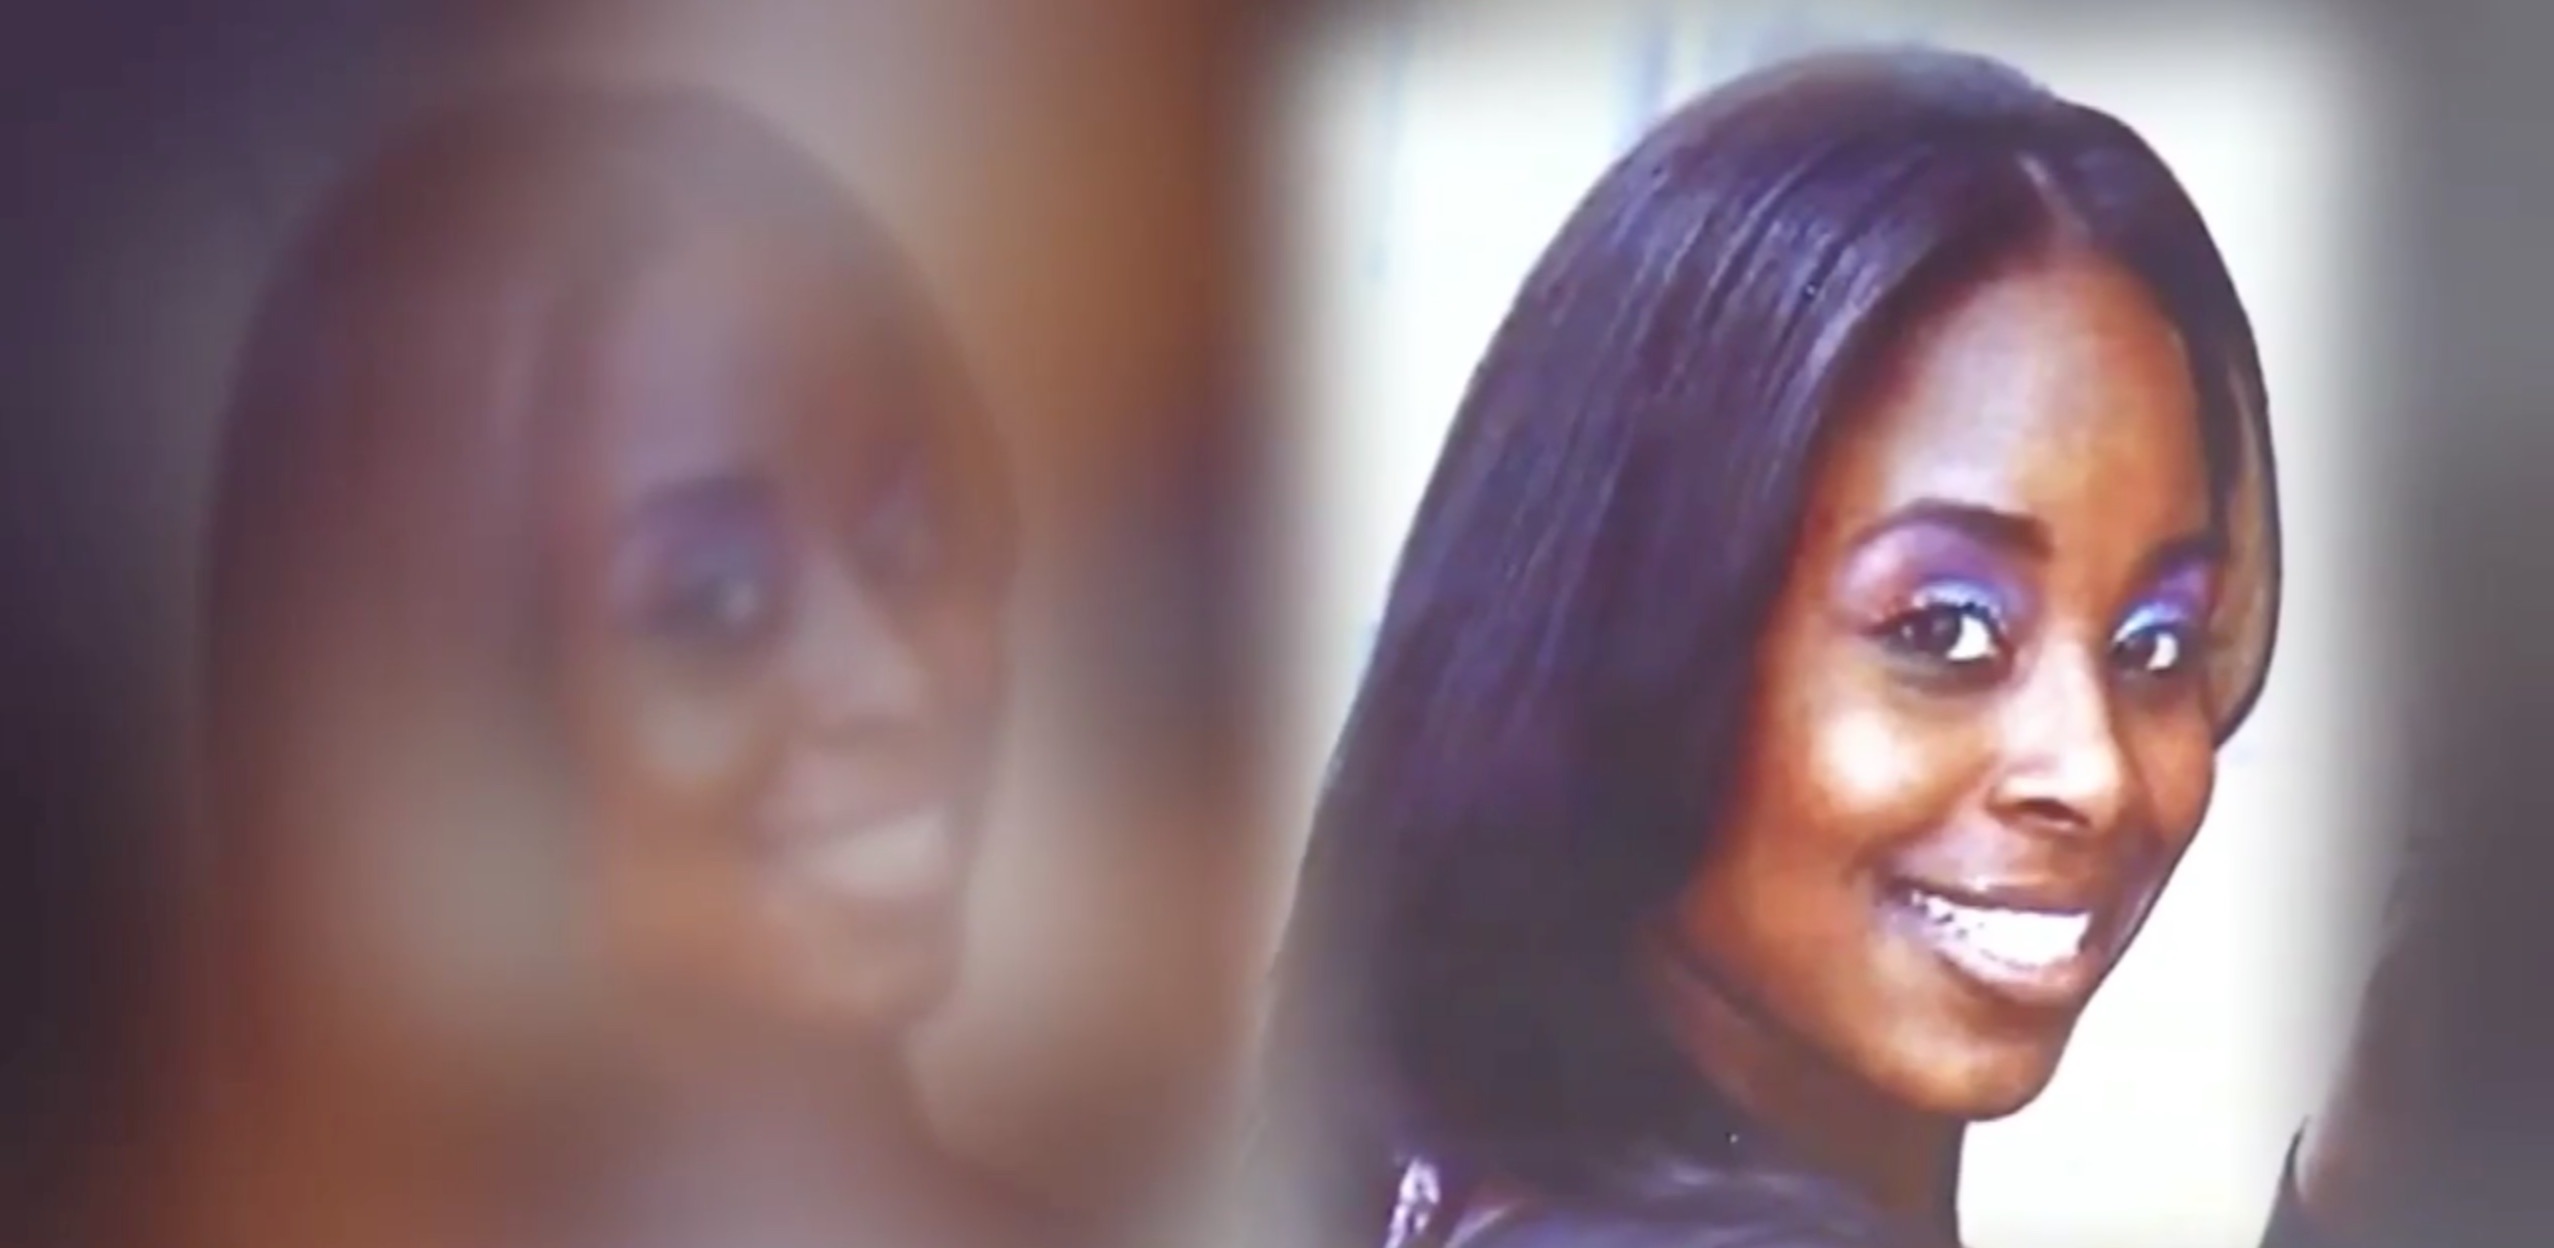 Family Of Woman Murdered In 2011 Awarded Nearly $500 Million In Wrongful Death Suit